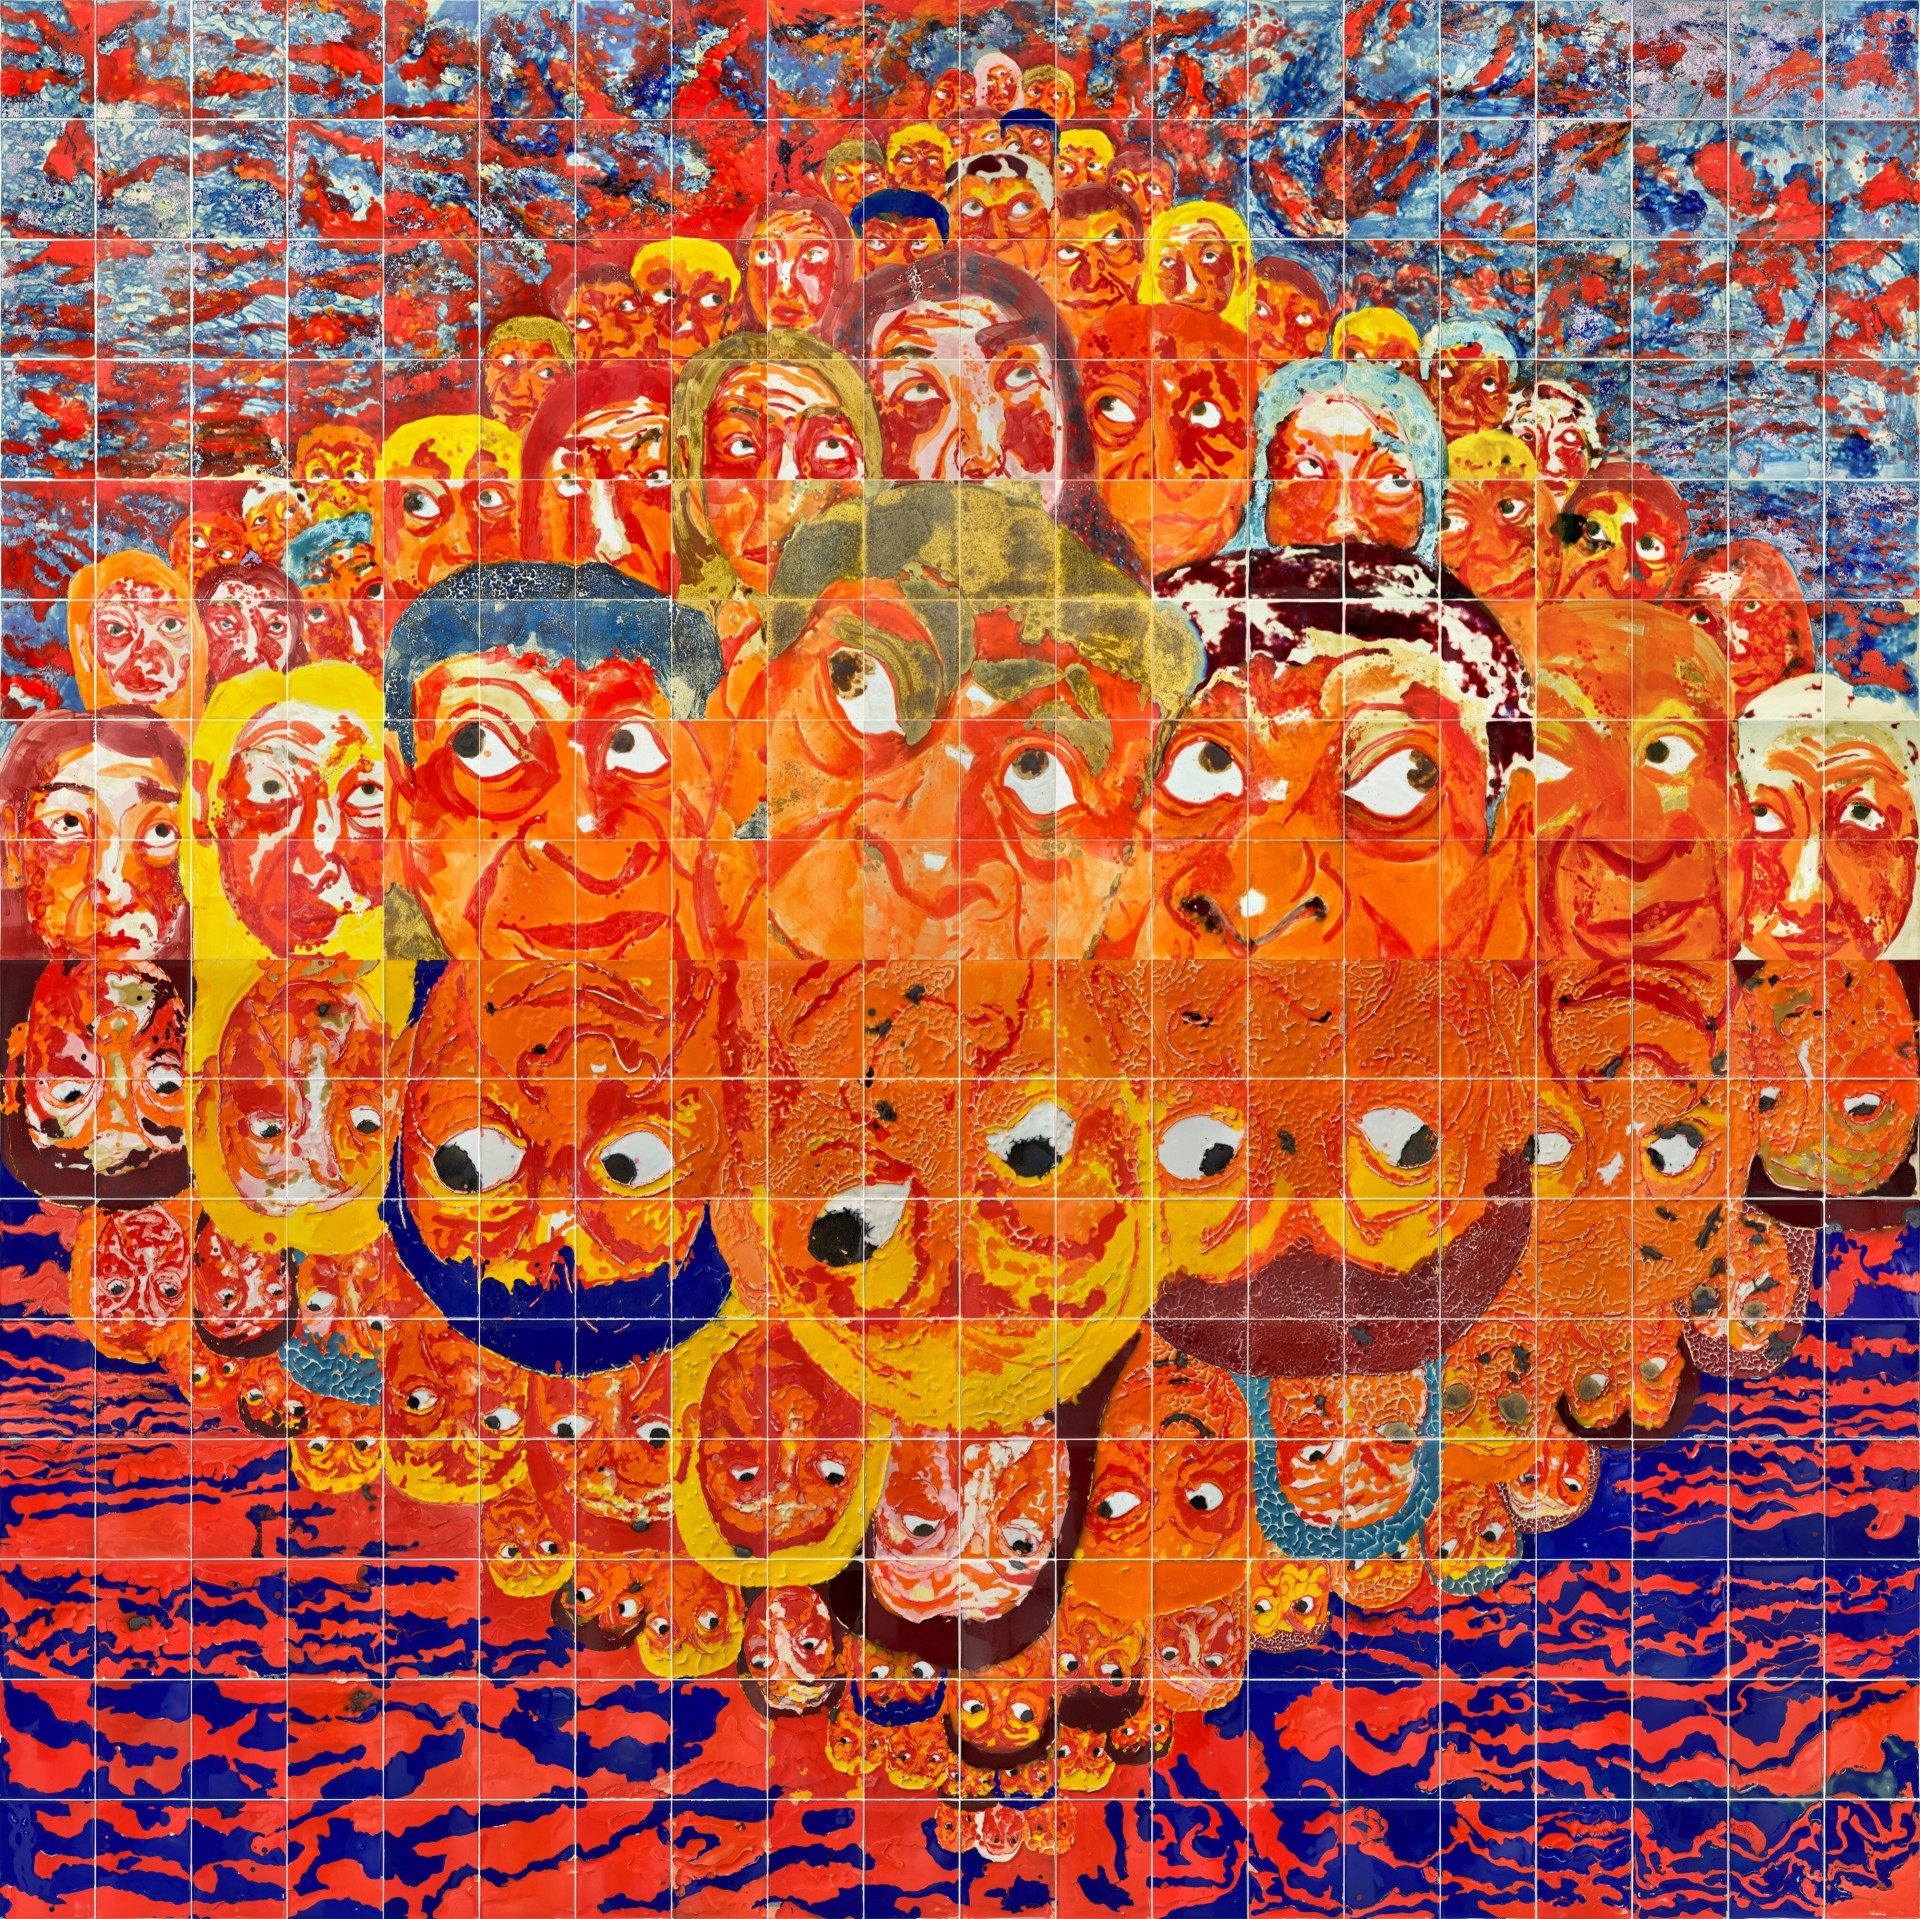 Rows of faces rendered in orange, red, and blue peer upward and to the side. Their reflection appears below the horizon line, as if reflected in water.